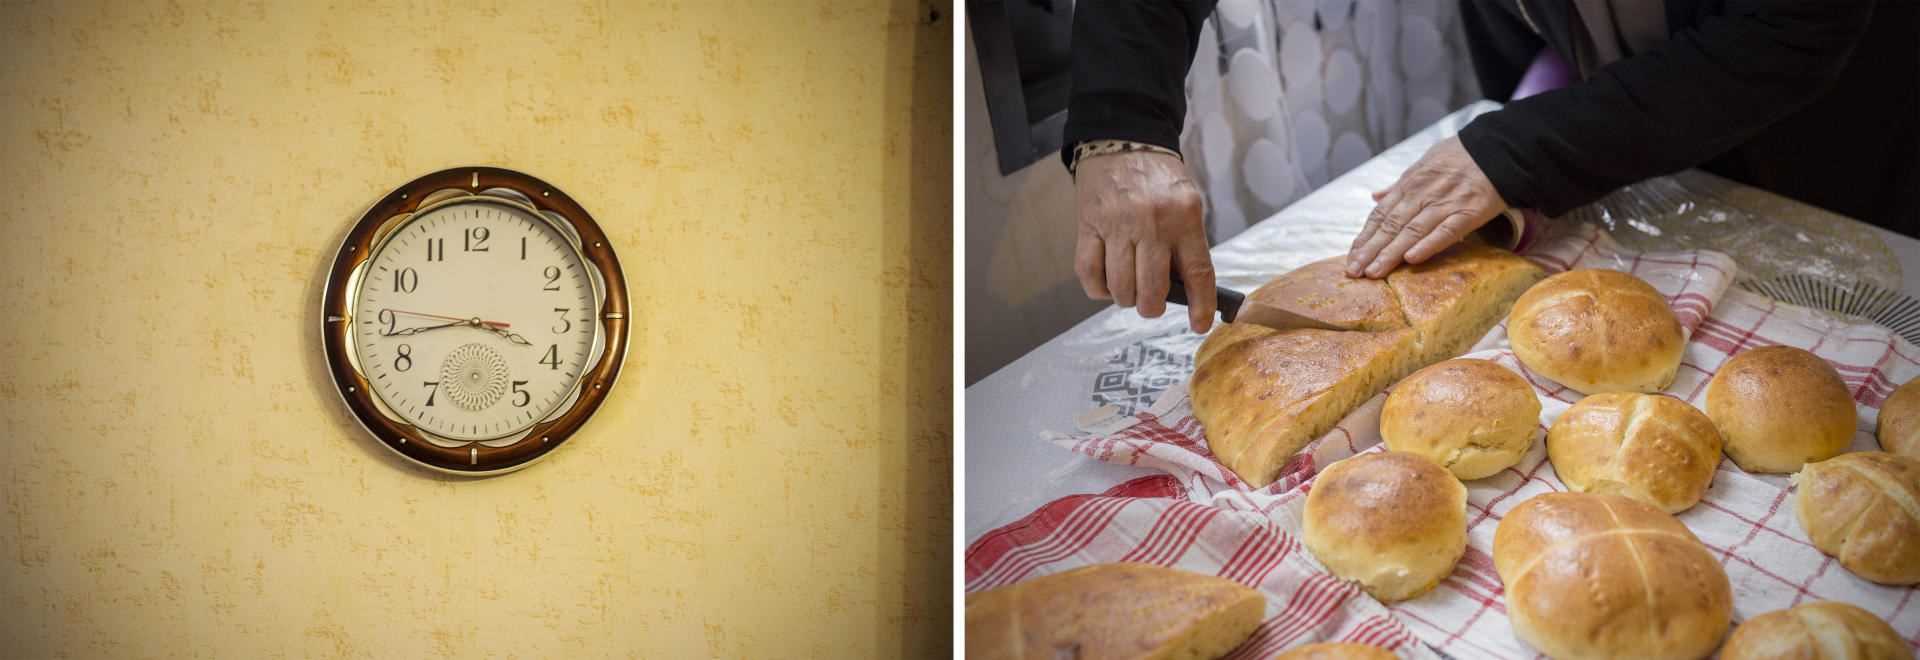 On the left, at Katouja Attouche, the clock is stopped at snack time.  On the right, Zohra Benoumeur prepares bread for her “sisters” who make Ramadan.